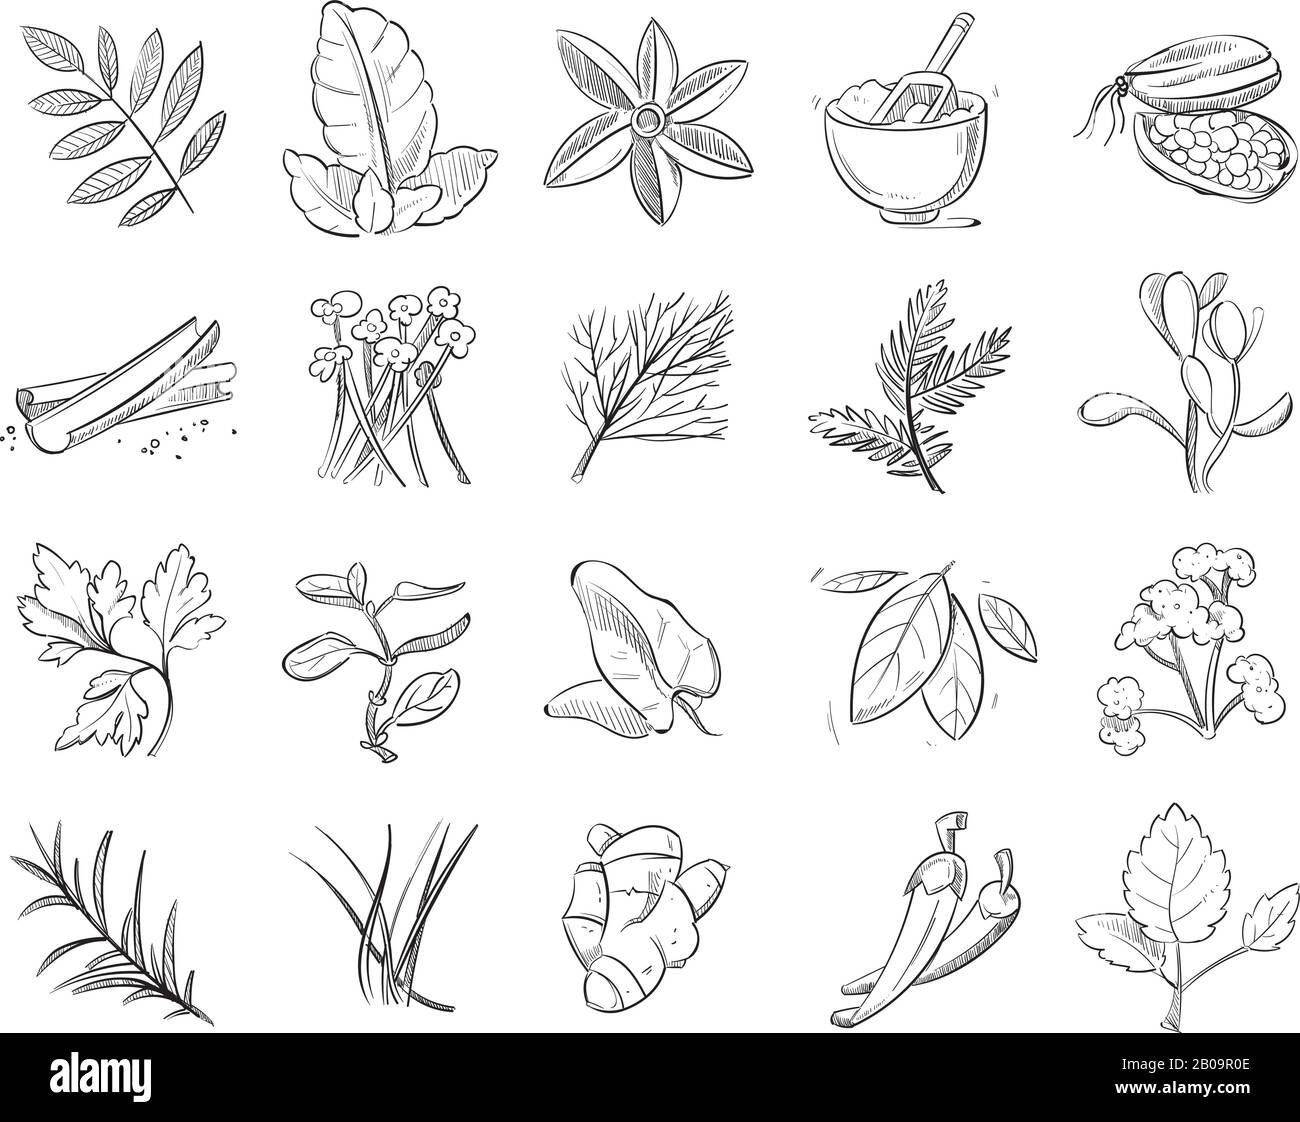 Vintage hand drawn herbs and spices, sketch drawing plants vector collection. Nature ingredient herbs, organic botanical aroma herbs illustration Stock Vector